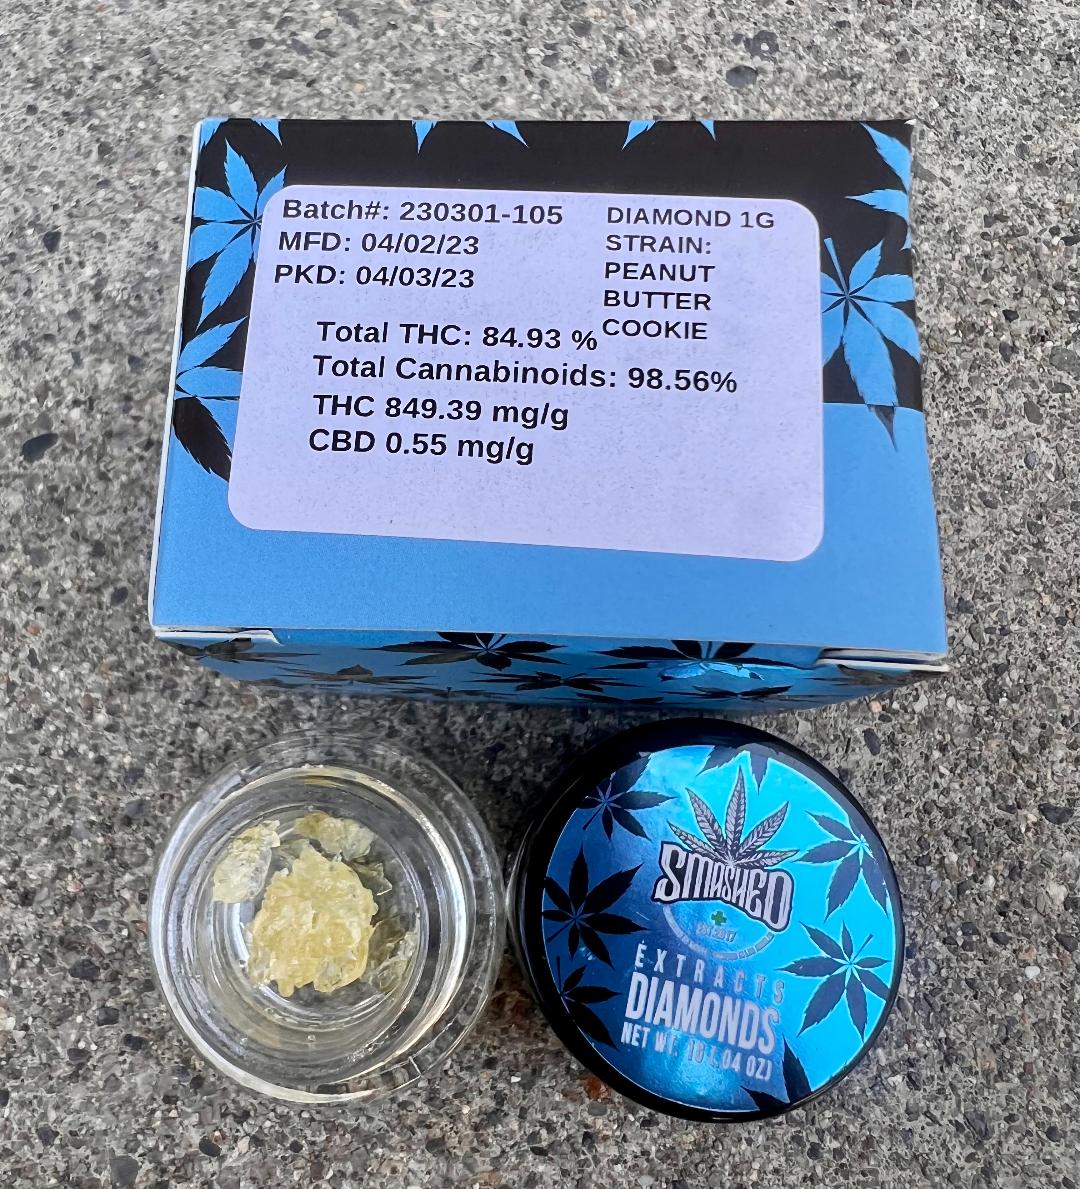 Smashed - Diamonds - Peanut Butter Cookies - Indica 1g - Thin Air Nursery